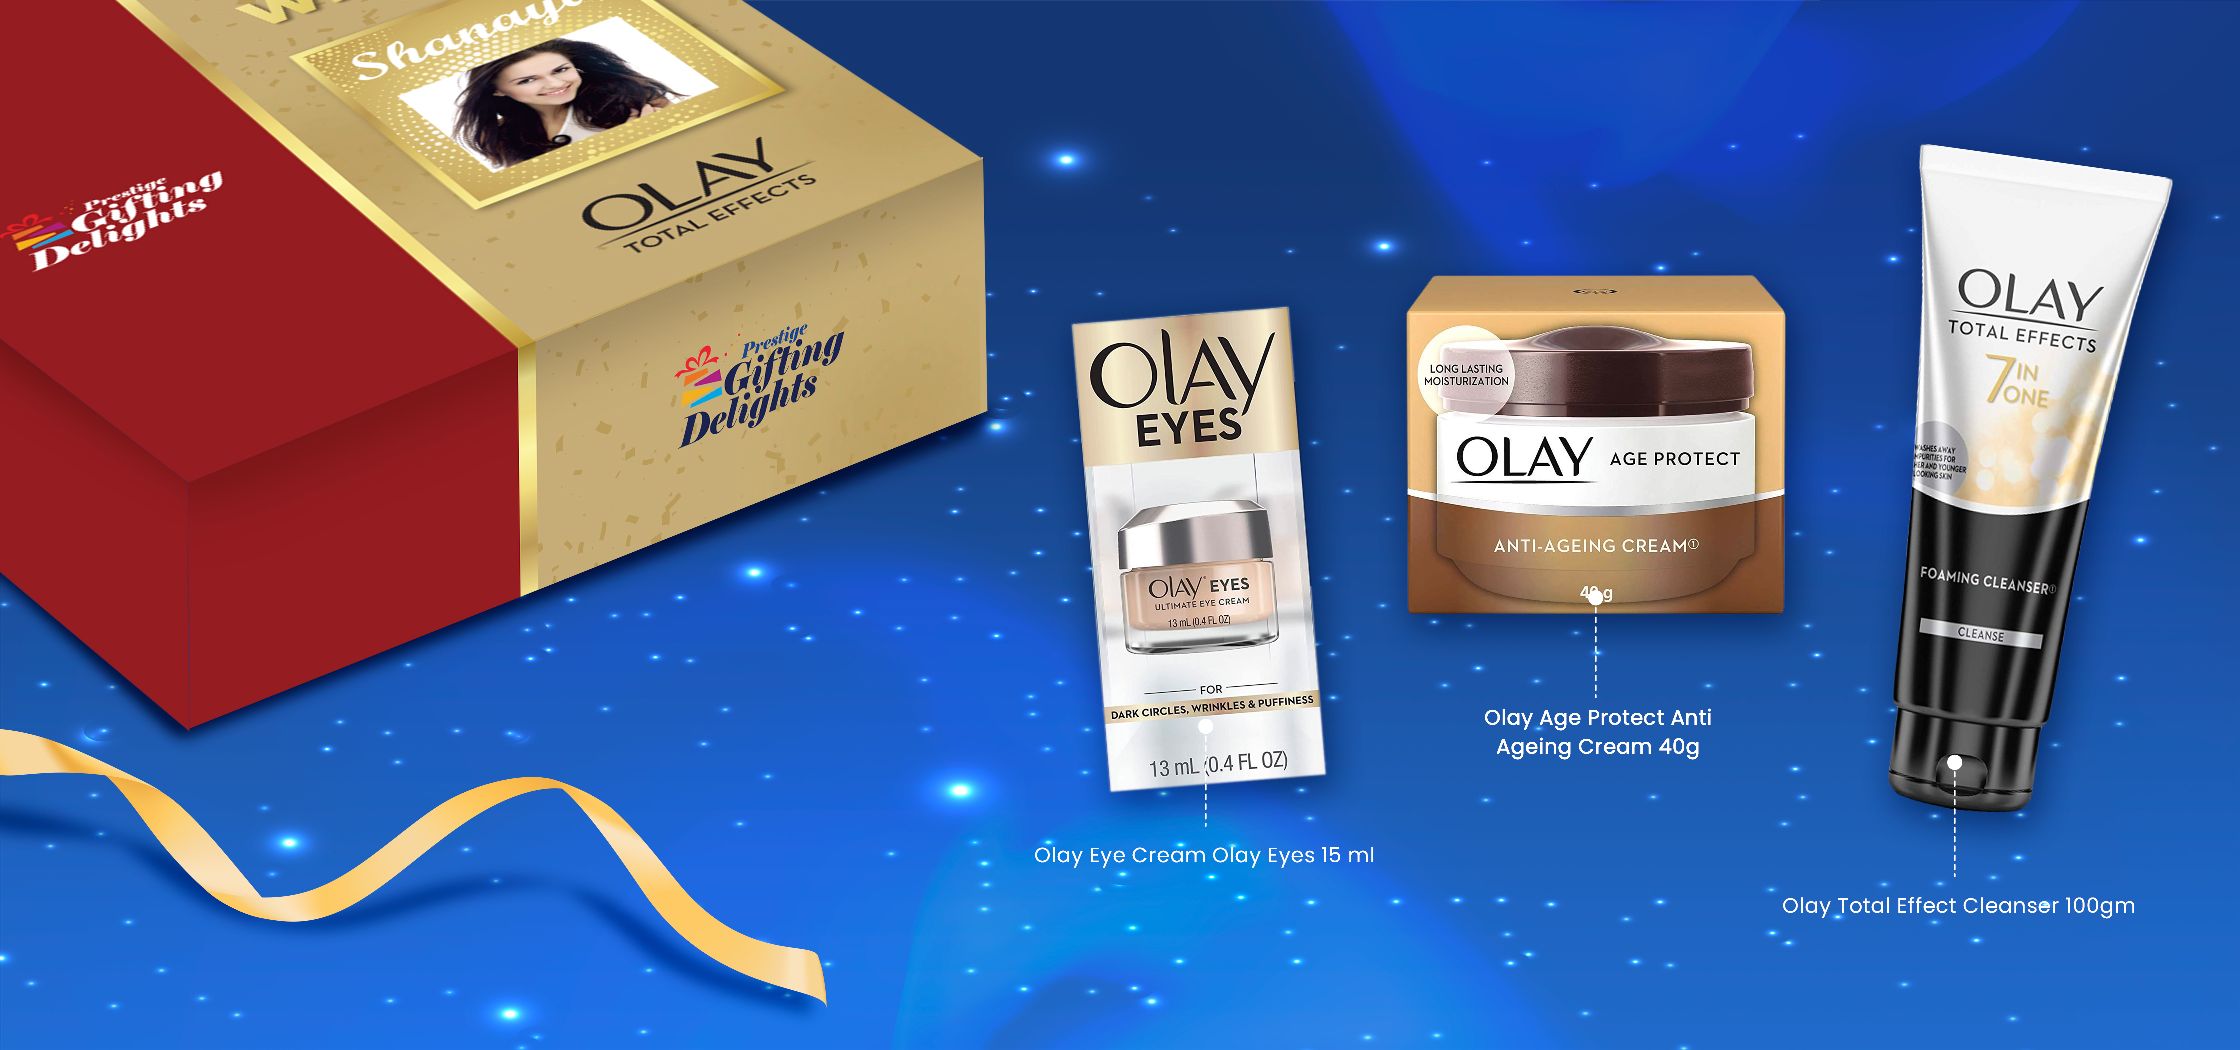 Olay Skin Rejuvenation Happy Anniversary Gift Pack Routine